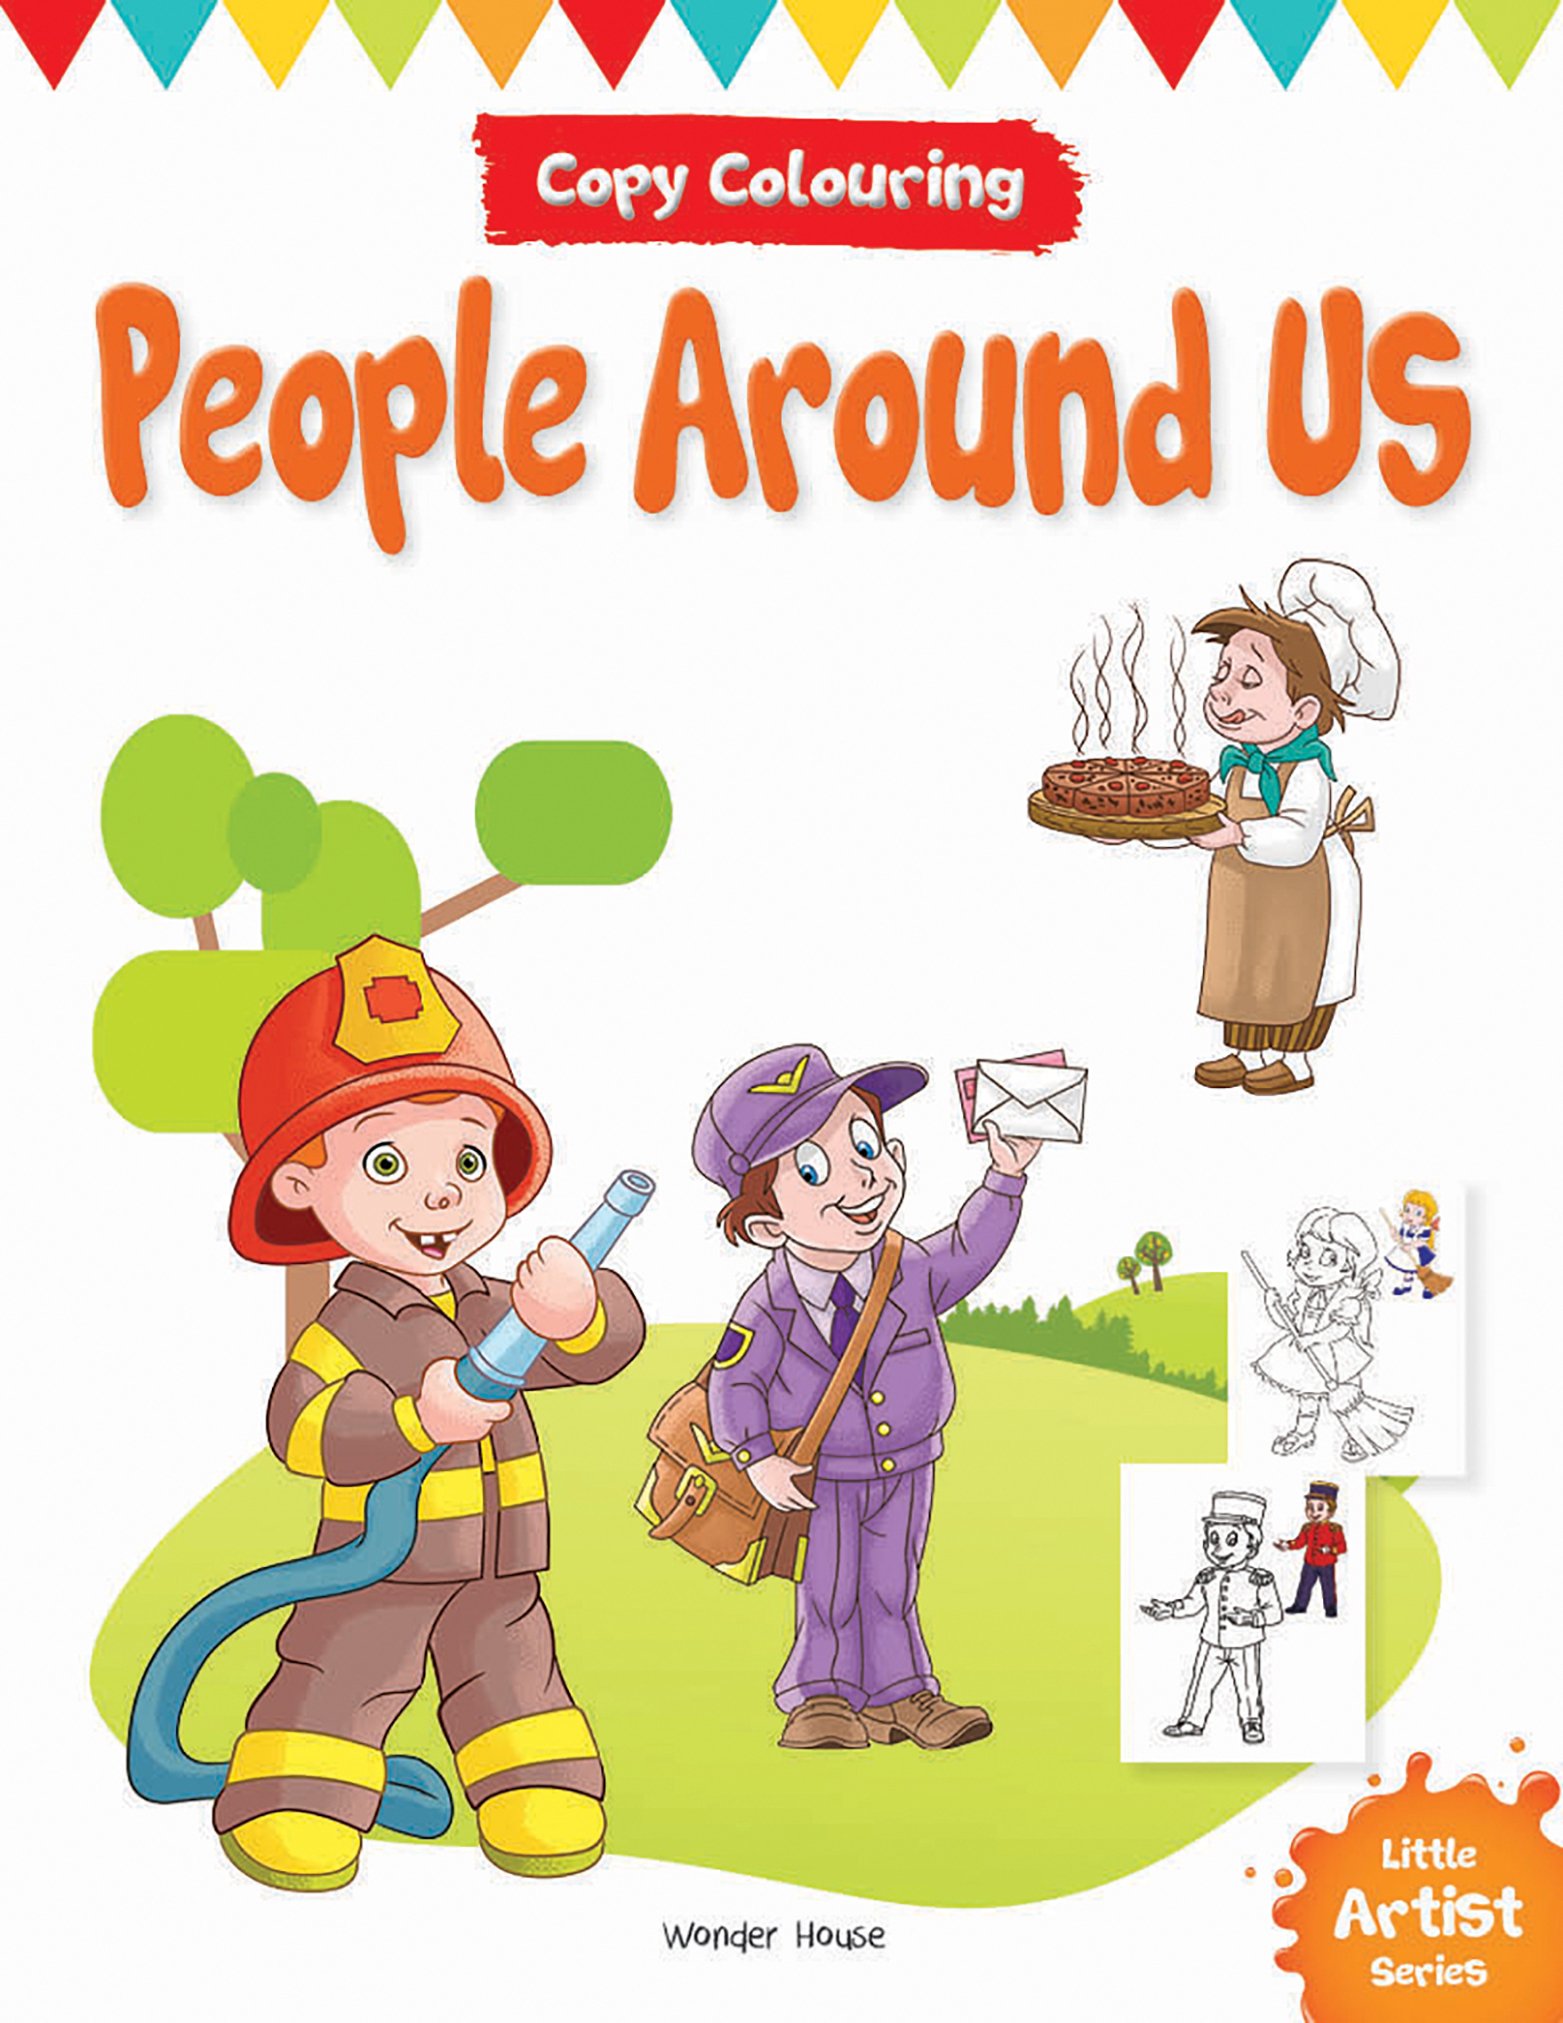 Little Artist Series - People Around Us : Copy Colouring Books